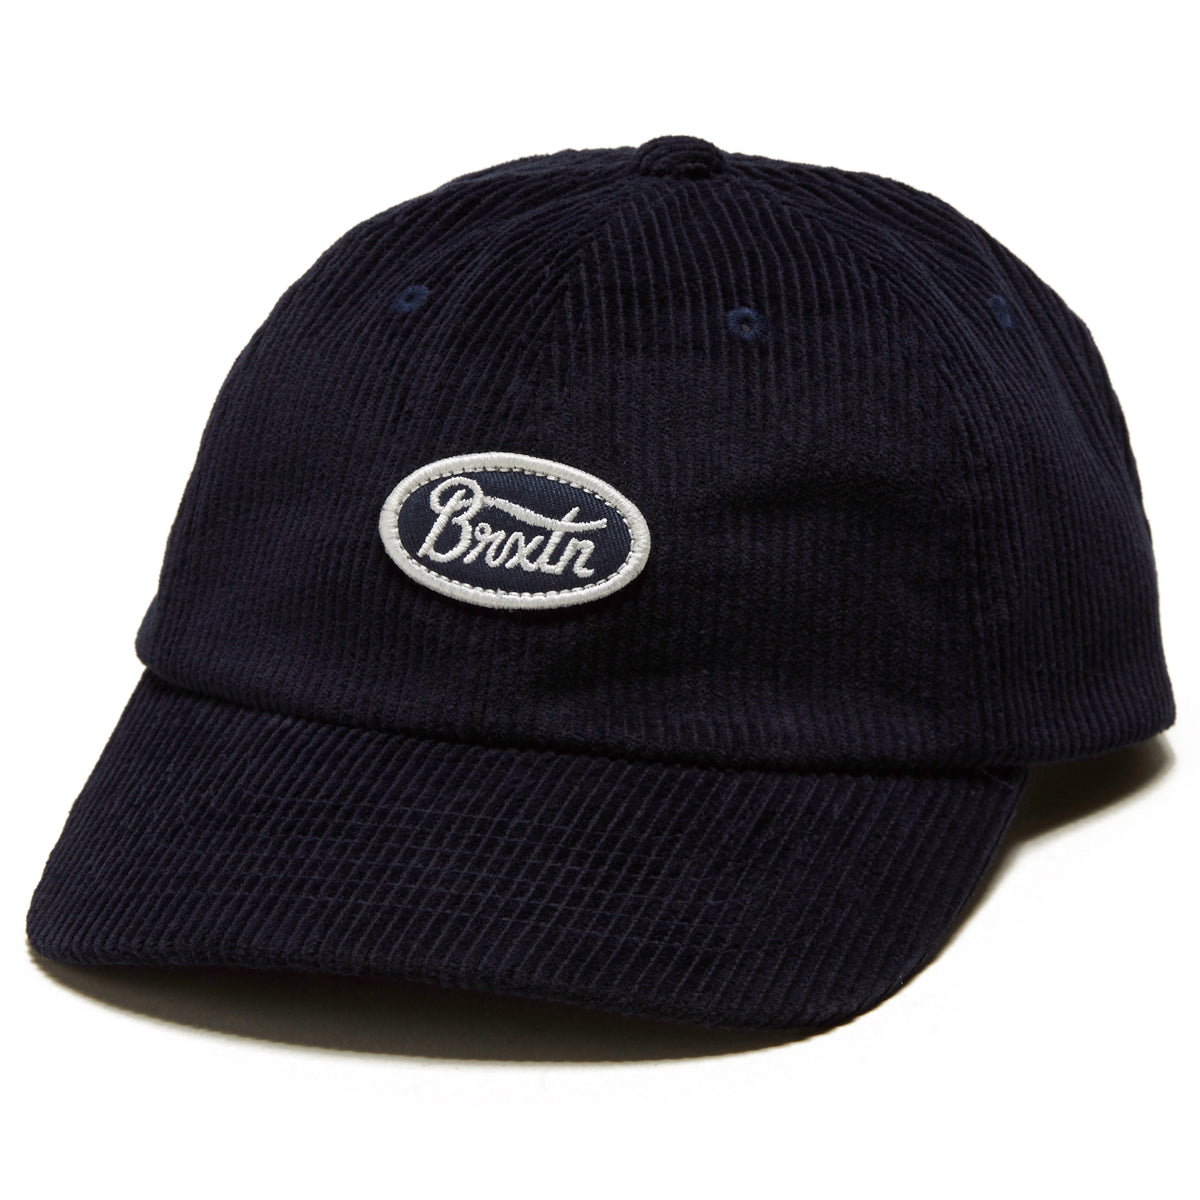 Brixton Parsons Lp Hat - Washed Navy Cord image 1